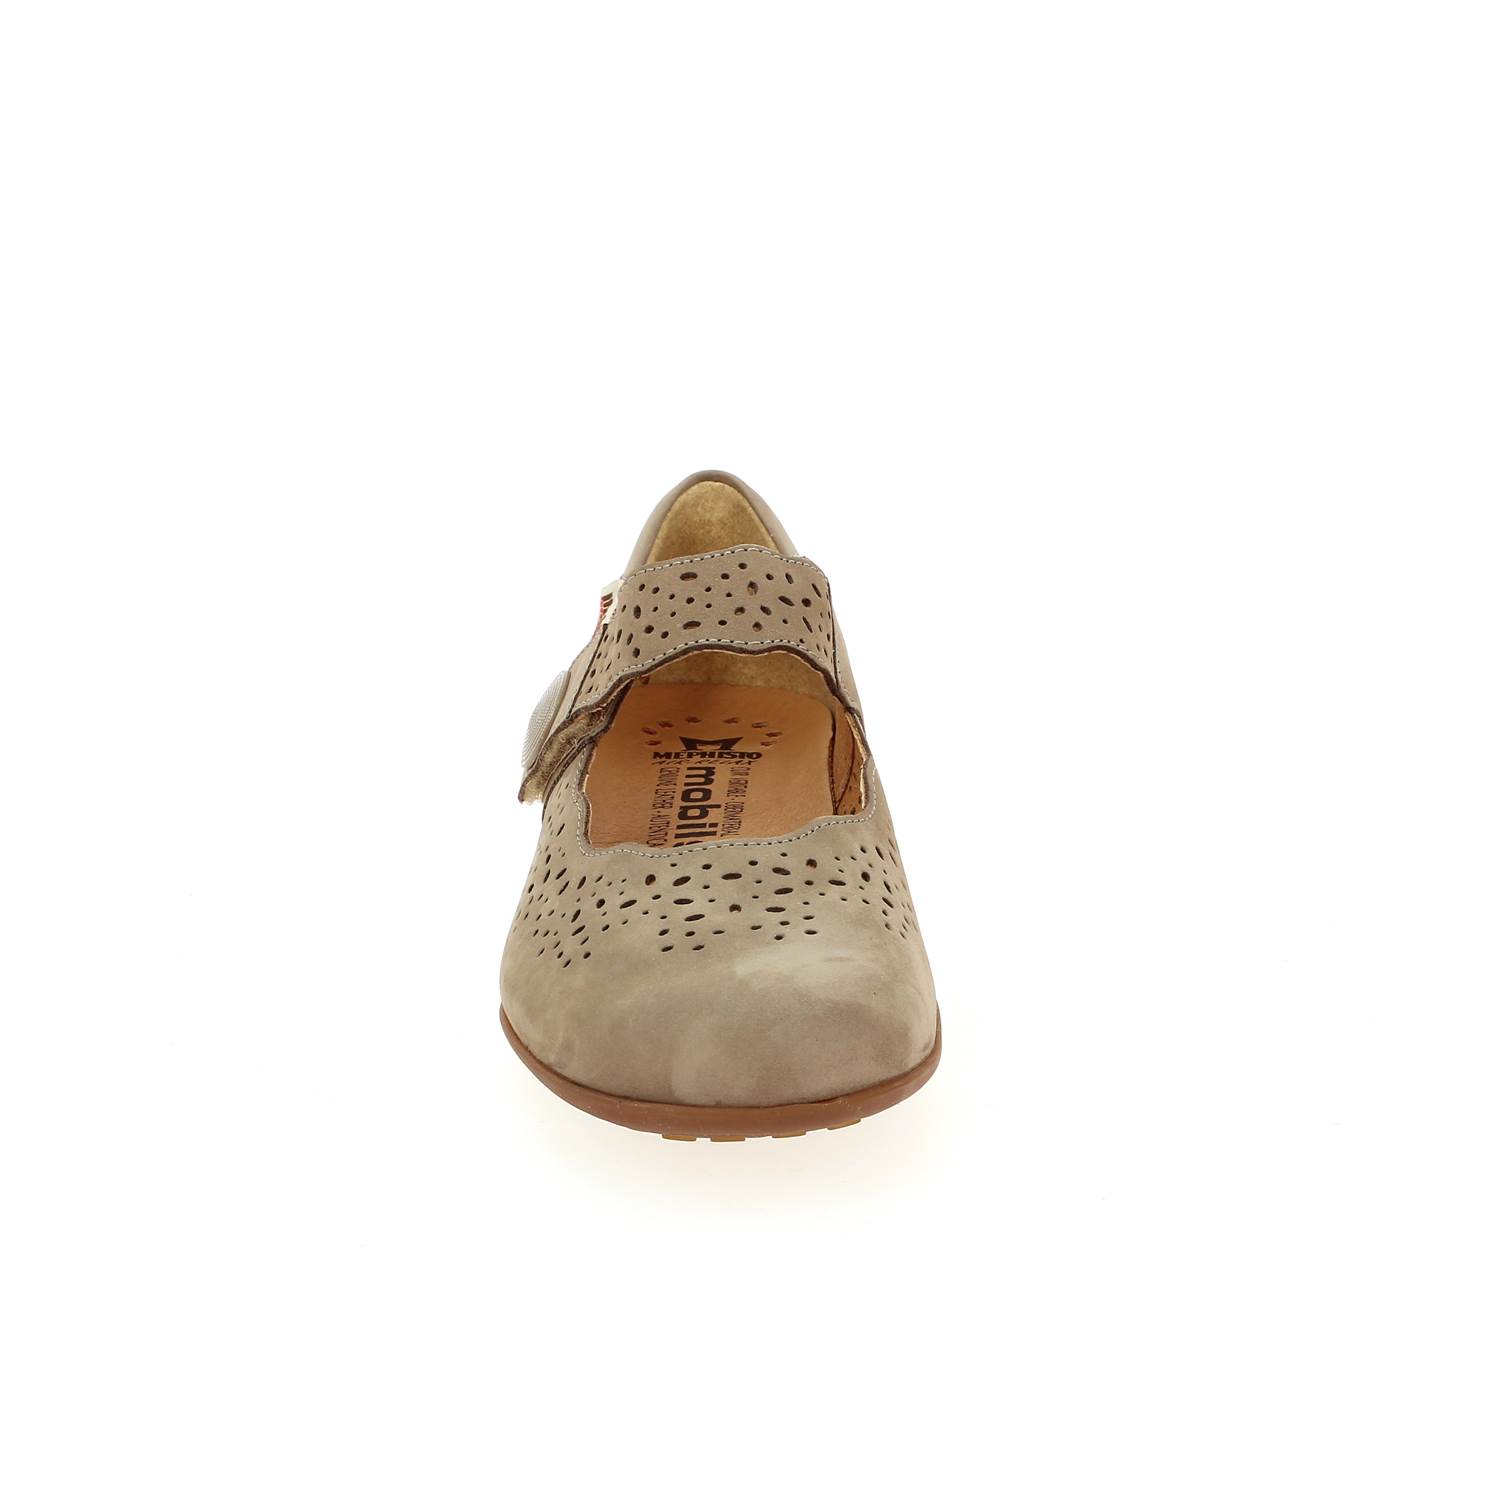 3 - FABIENNE - MOBILS BY MEPHISTO - Ballerines et babies - Nubuck, Synthétique, Cuir